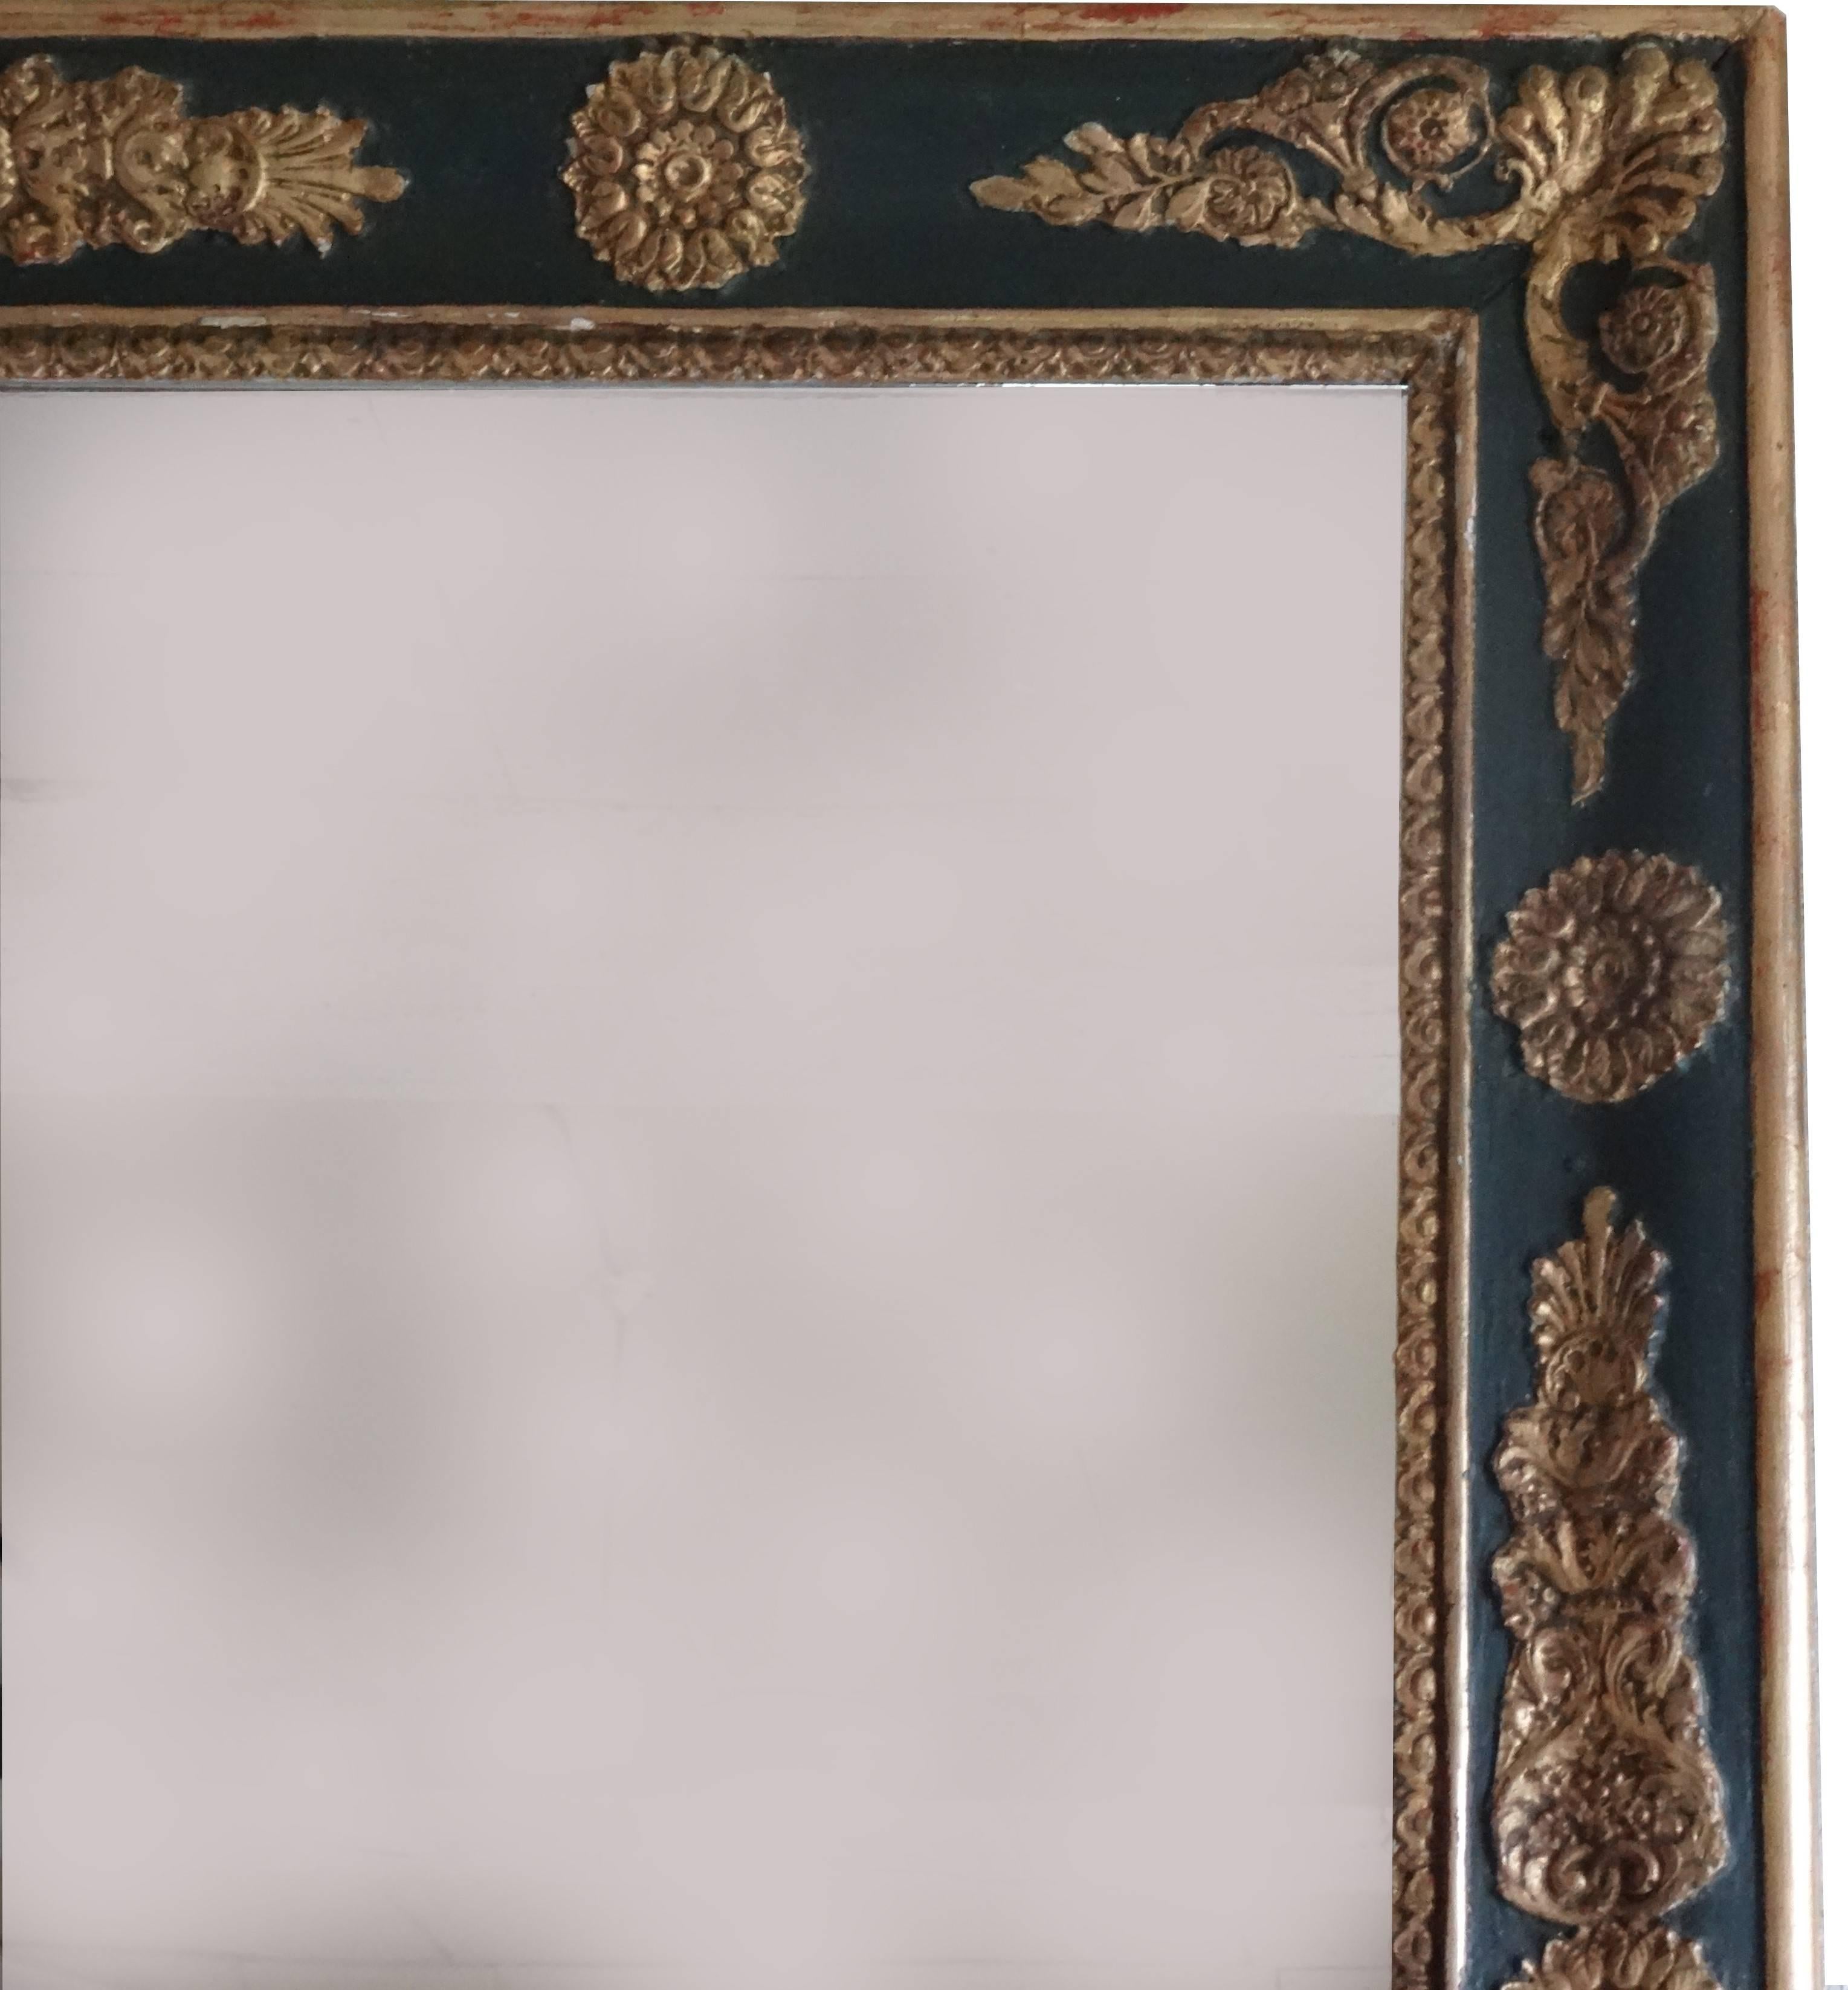 19th century Empire style French antique mirror. The wooden frame is in it’s original, black paint, with gilded Empire ornaments. The original plate is softly aged. The frame under, shows that this mirror is made to be on top of a fireplace, wall